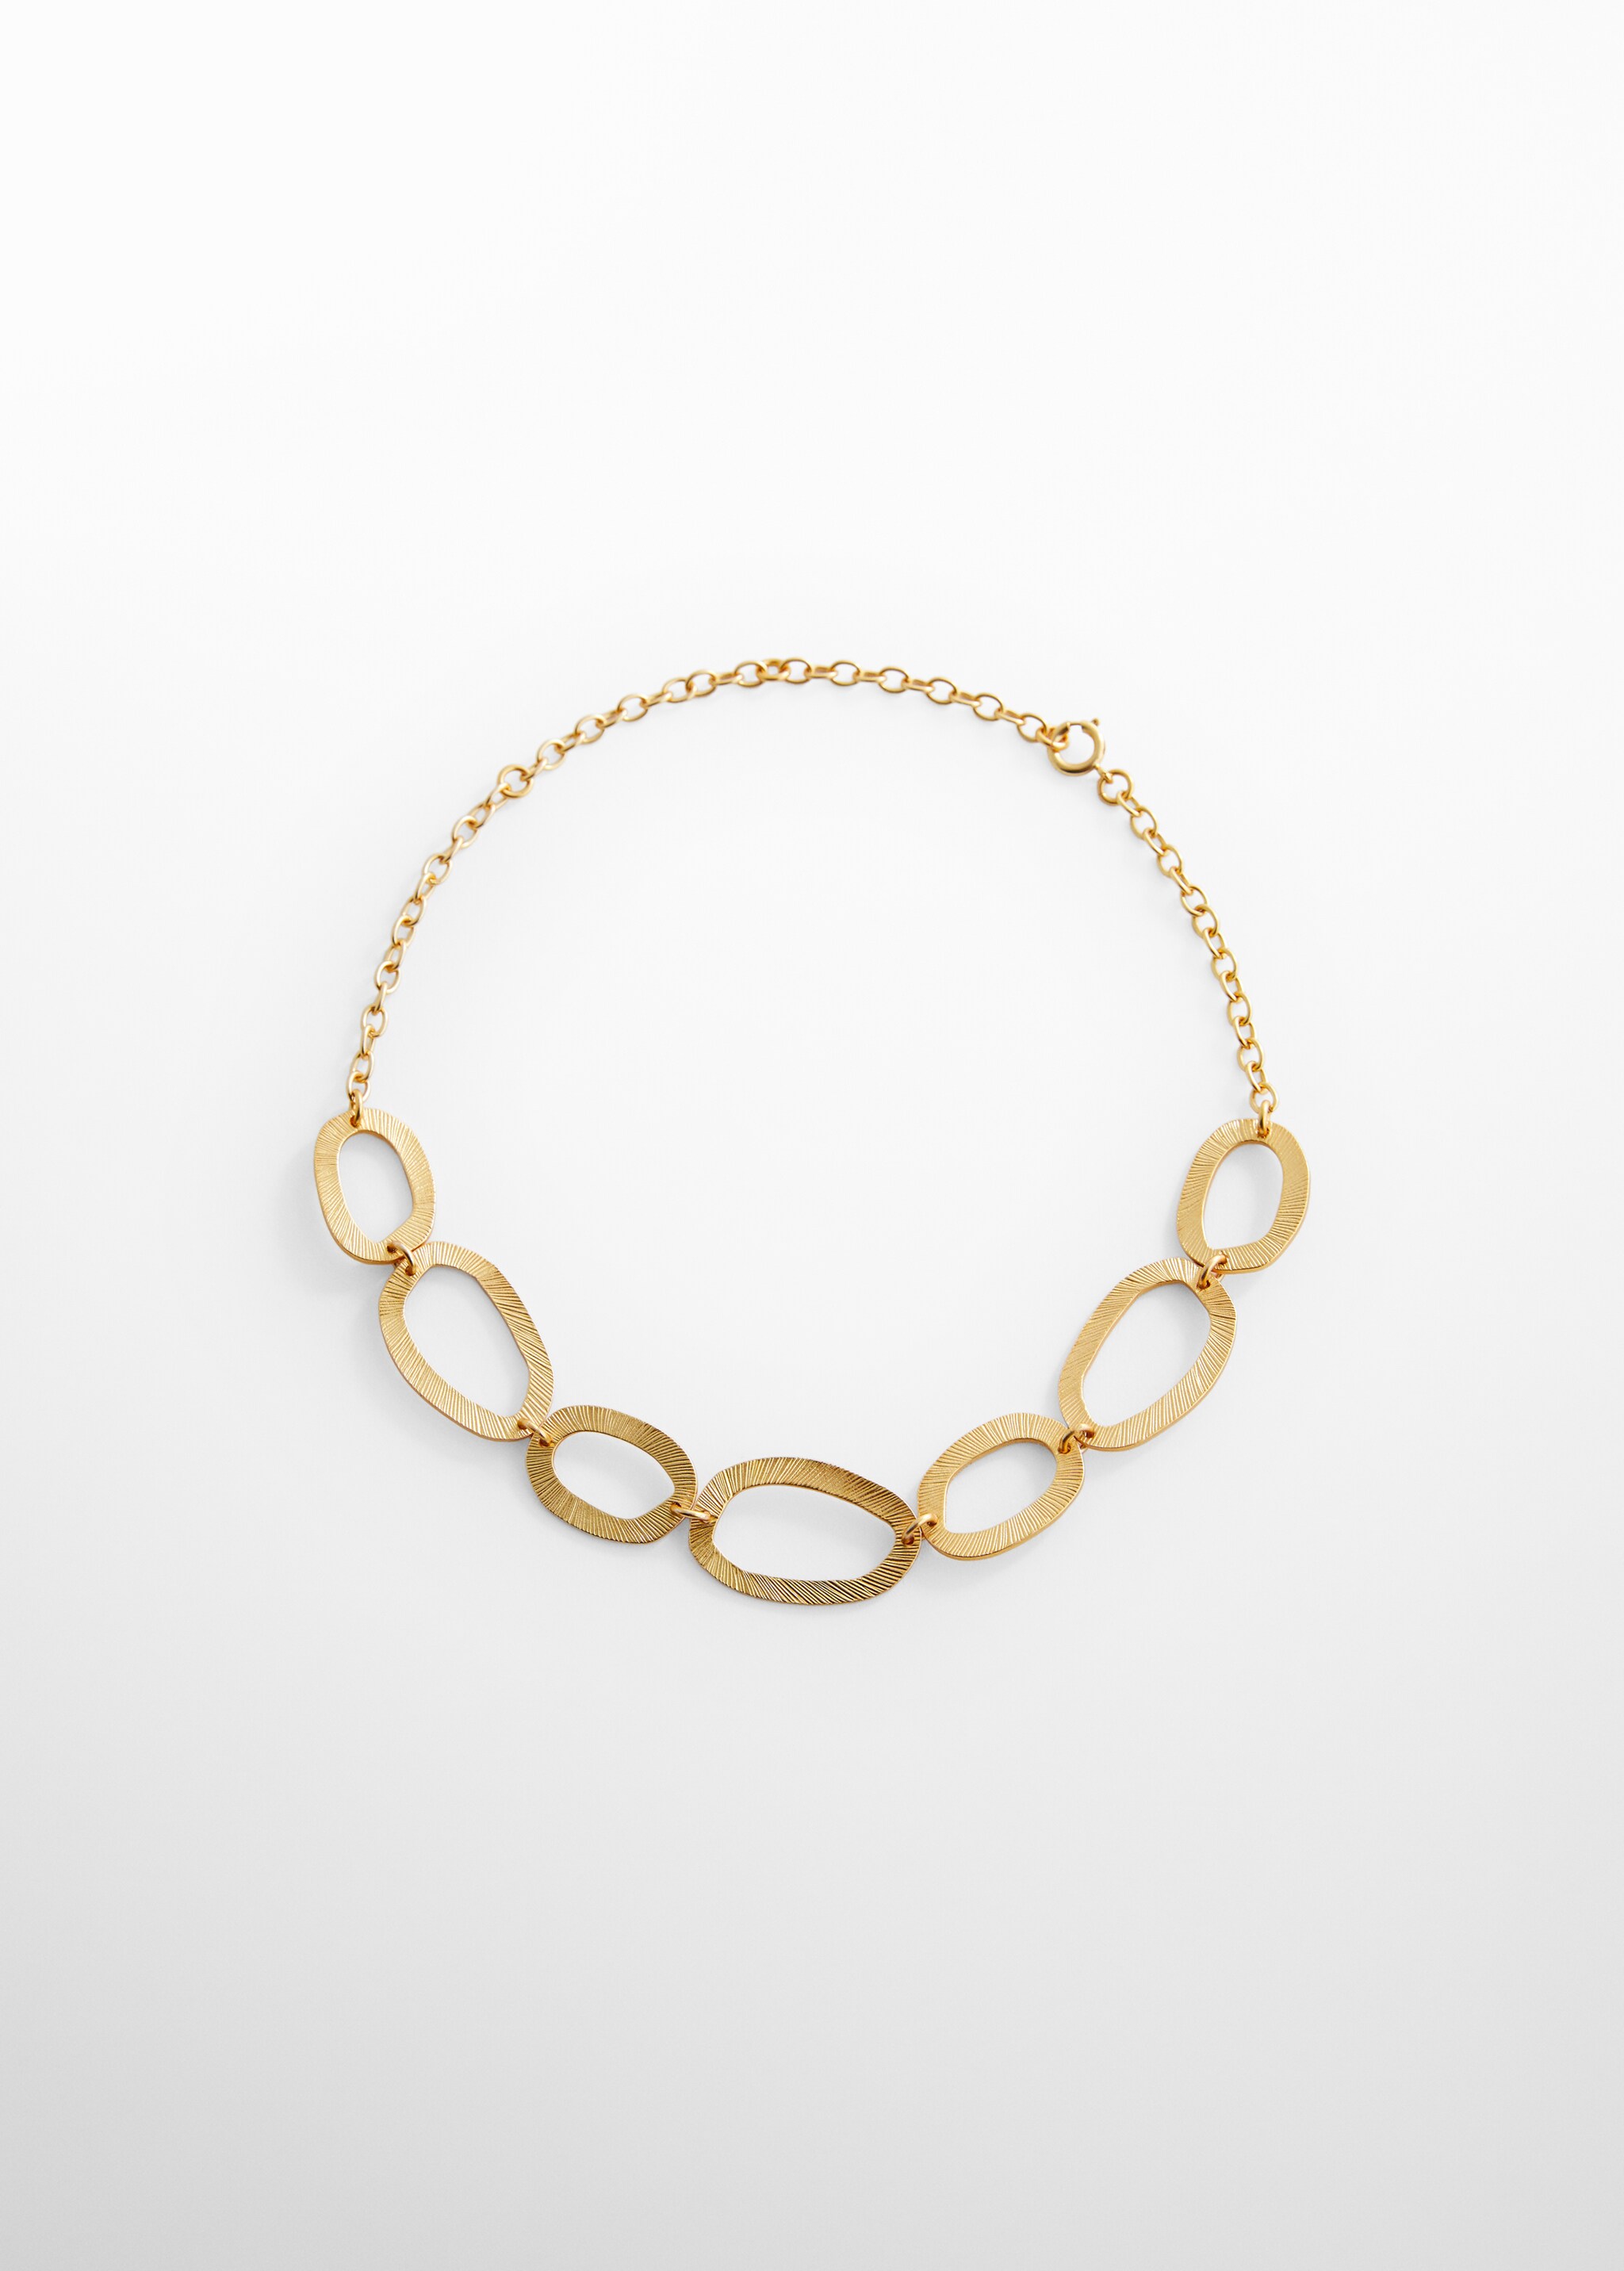 Irregular hoops necklace - Article without model